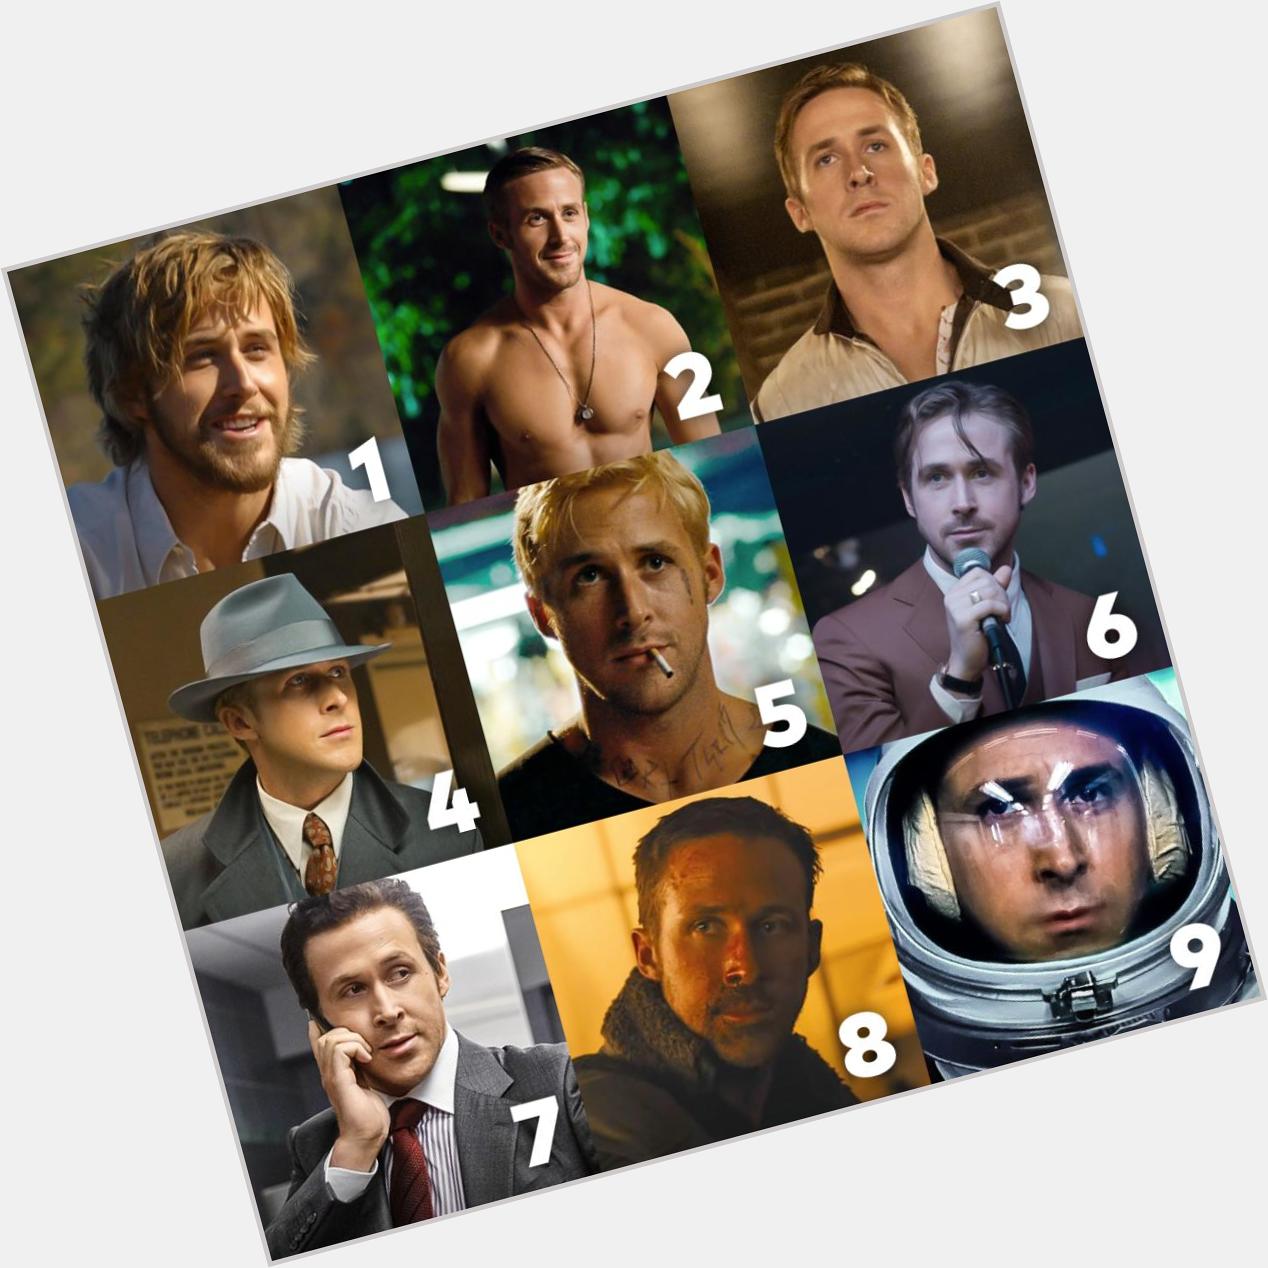 Which Ryan Gosling are you wishing a Happy 40th Birthday? 